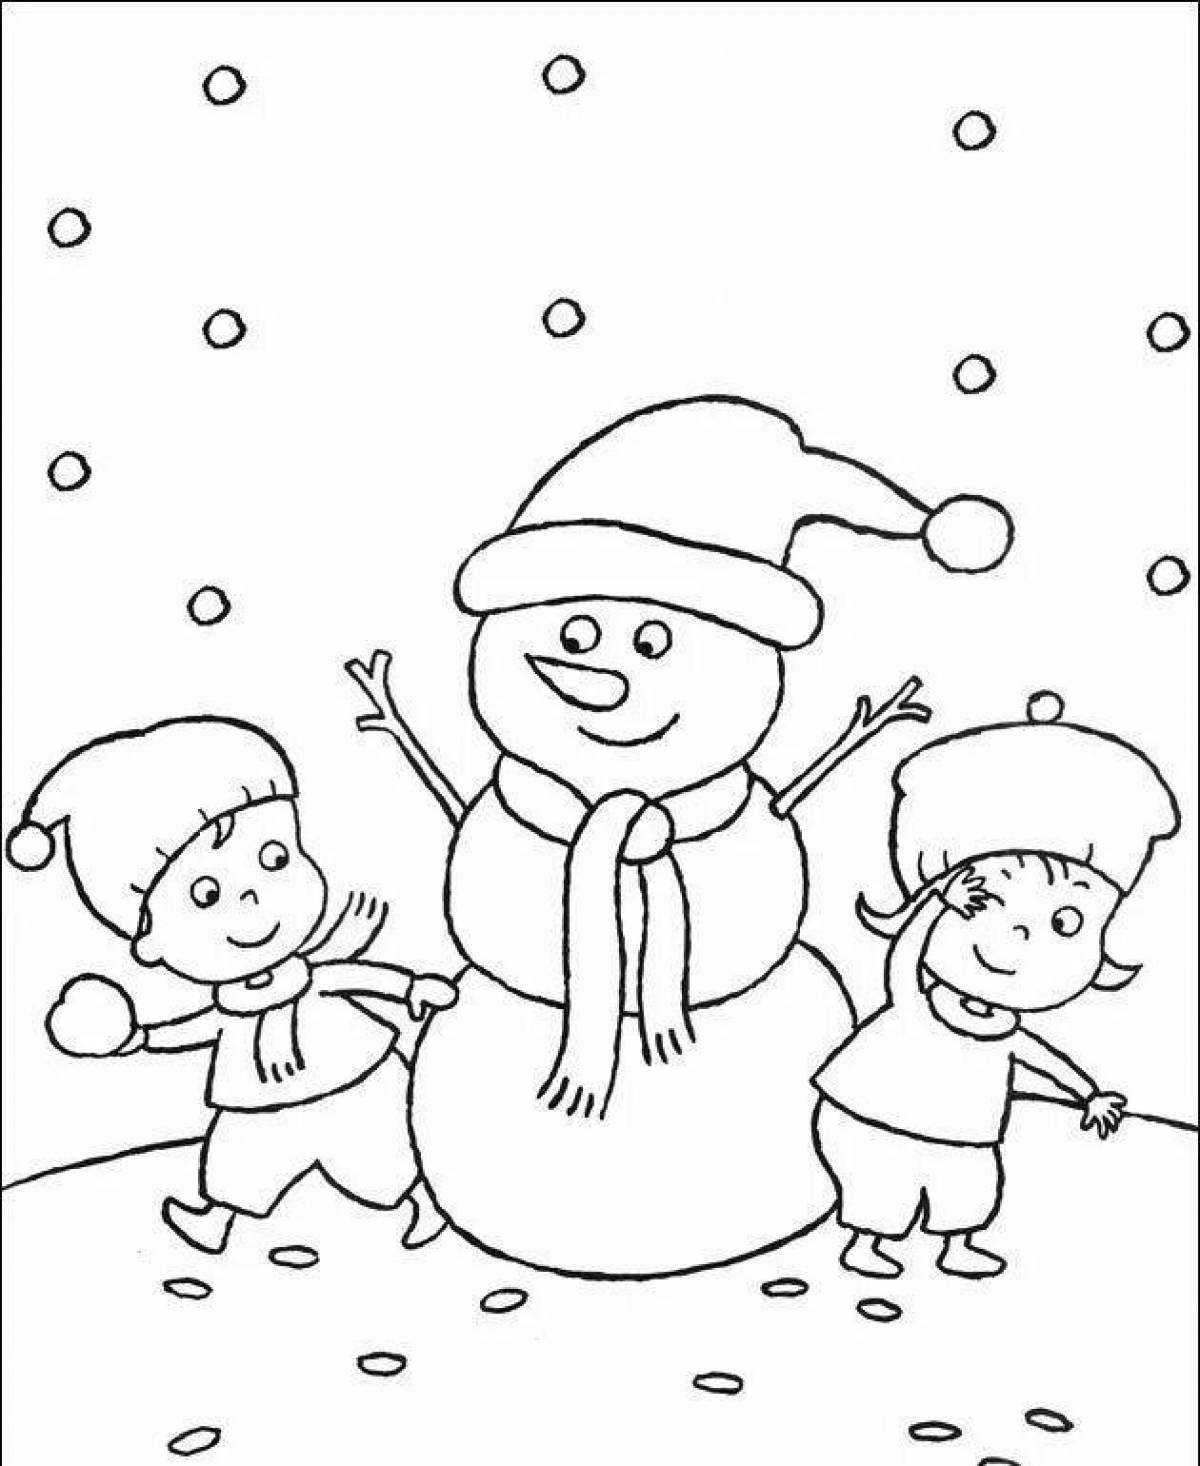 Coloring live children playing snowballs